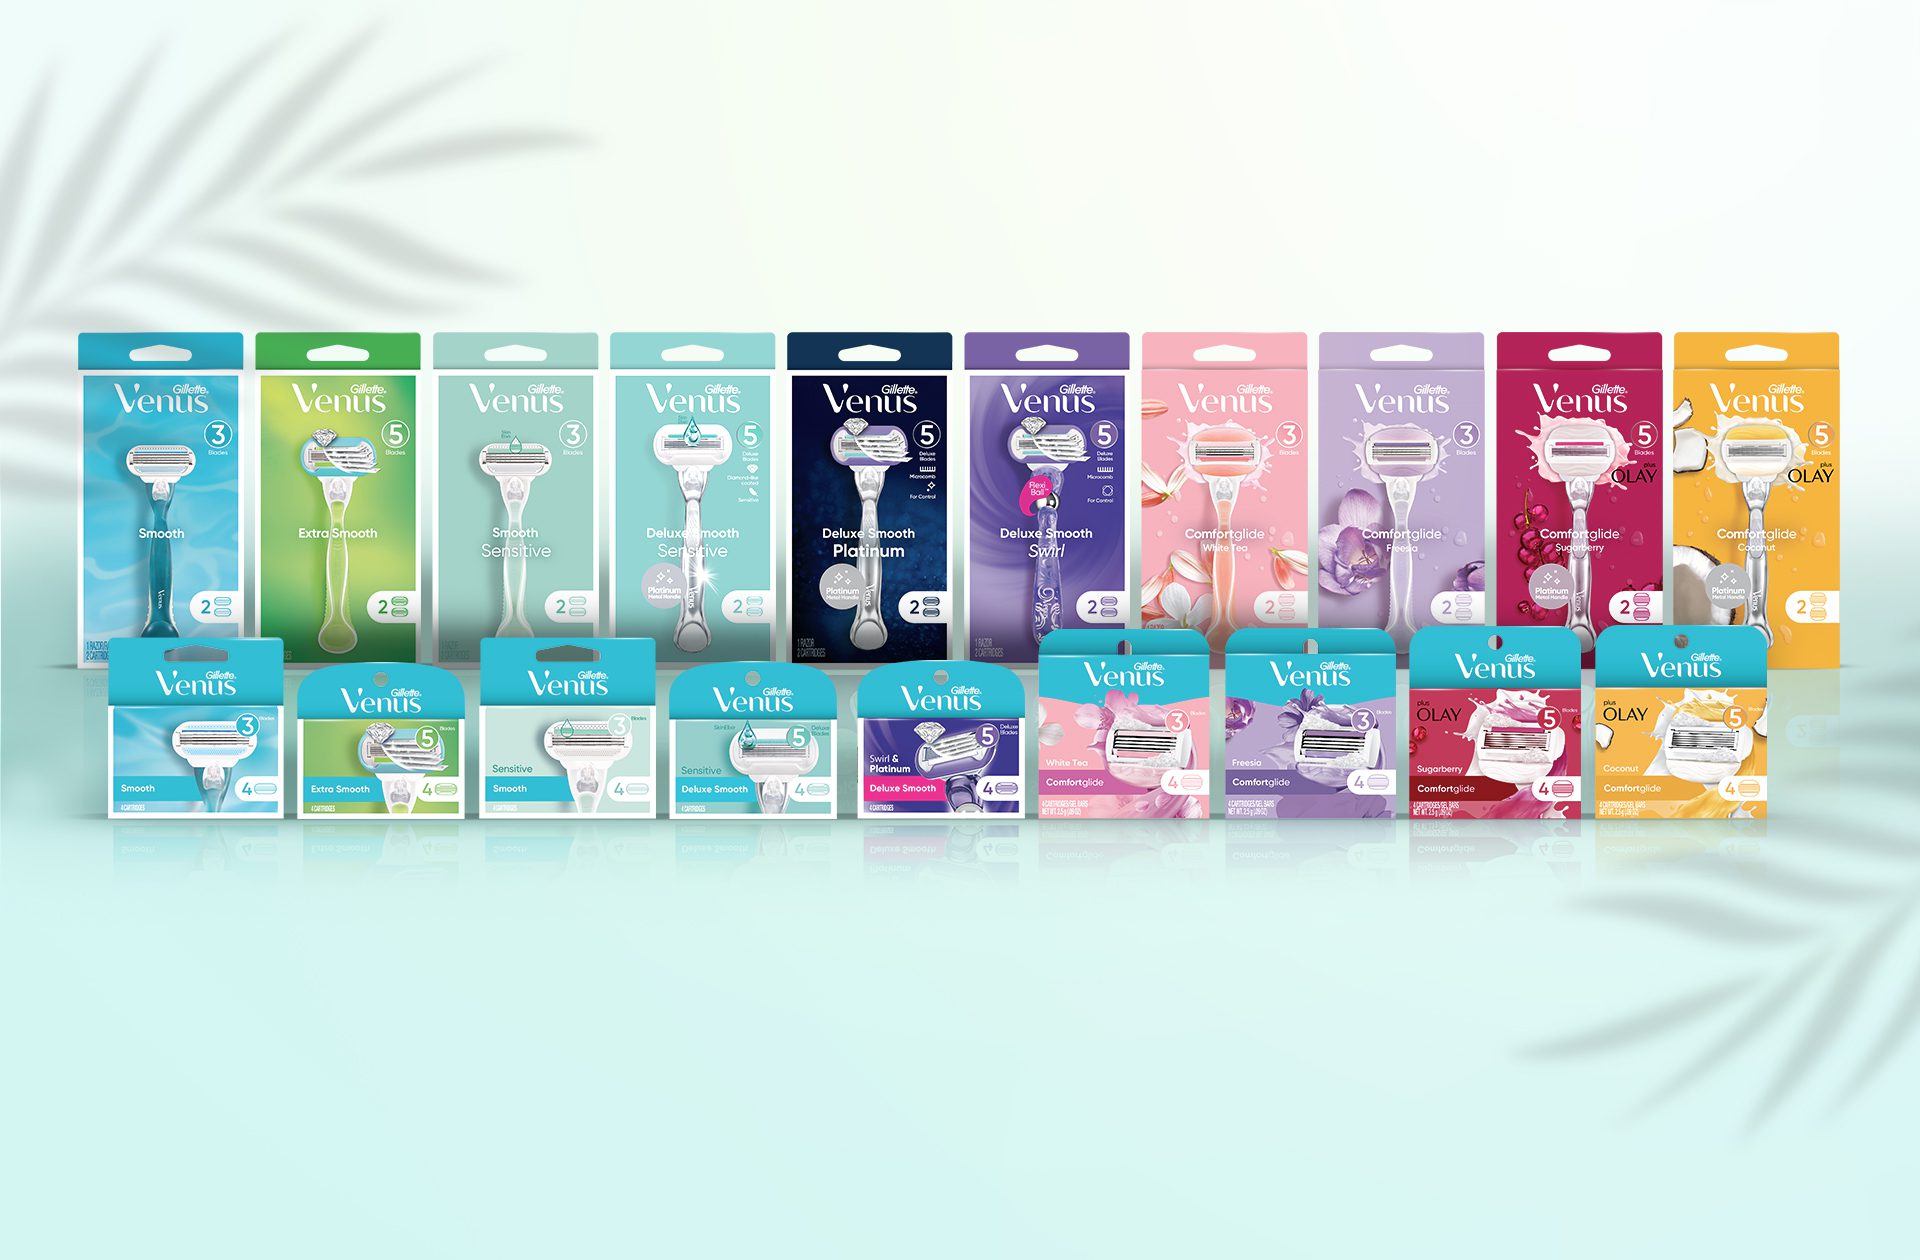 Photograph of a full product line of Gillette Venus including smooth, comfortglide and deluxe smooth razors and cartridges, featuring packs created by a cpg packaging design agency.